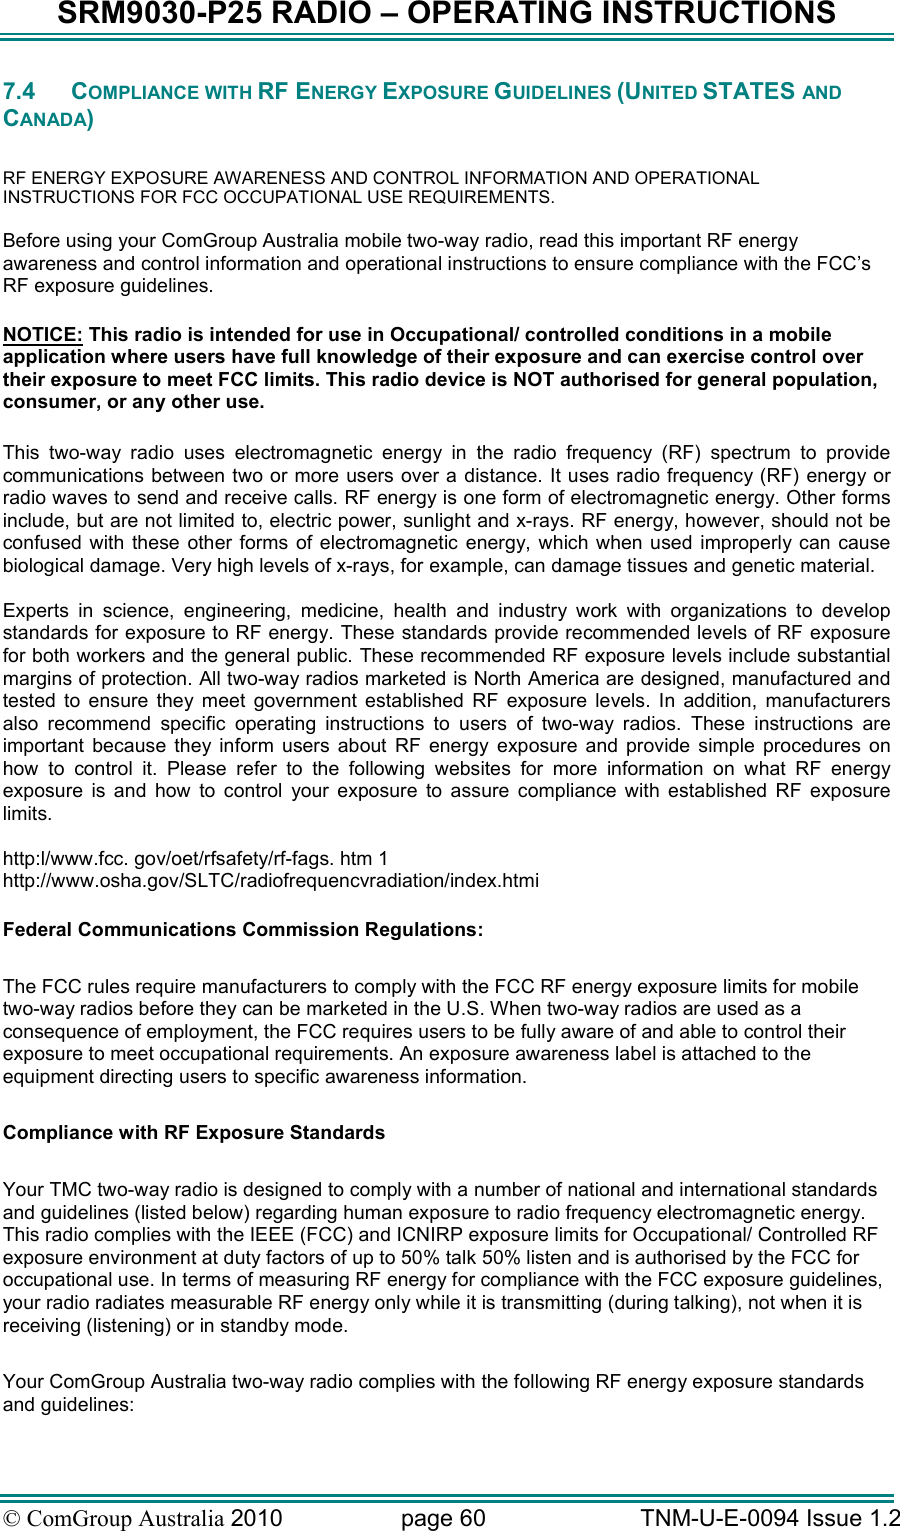 SRM9030-P25 RADIO – OPERATING INSTRUCTIONS © ComGroup Australia 2010  page 60   TNM-U-E-0094 Issue 1.2 7.4  COMPLIANCE WITH RF ENERGY EXPOSURE GUIDELINES (UNITED STATES AND CANADA)  RF ENERGY EXPOSURE AWARENESS AND CONTROL INFORMATION AND OPERATIONAL INSTRUCTIONS FOR FCC OCCUPATIONAL USE REQUIREMENTS. Before using your ComGroup Australia mobile two-way radio, read this important RF energy awareness and control information and operational instructions to ensure compliance with the FCC’s RF exposure guidelines.  NOTICE: This radio is intended for use in Occupational/ controlled conditions in a mobile application where users have full knowledge of their exposure and can exercise control over their exposure to meet FCC limits. This radio device is NOT authorised for general population, consumer, or any other use.  This  two-way  radio  uses  electromagnetic  energy  in  the  radio  frequency  (RF)  spectrum  to  provide communications between two or more users over a distance. It uses radio frequency (RF) energy or radio waves to send and receive calls. RF energy is one form of electromagnetic energy. Other forms include, but are not limited to, electric power, sunlight and x-rays. RF energy, however, should not be confused  with  these  other  forms  of  electromagnetic  energy,  which  when  used improperly can  cause biological damage. Very high levels of x-rays, for example, can damage tissues and genetic material.  Experts  in  science,  engineering,  medicine,  health  and  industry  work  with  organizations  to  develop standards for exposure to RF energy. These standards provide recommended levels of RF exposure for both workers and the general public. These recommended RF exposure levels include substantial margins of protection. All two-way radios marketed is North America are designed, manufactured and tested  to  ensure  they  meet  government  established  RF  exposure  levels.  In  addition,  manufacturers also  recommend  specific  operating  instructions  to  users  of  two-way  radios.  These  instructions  are important  because  they  inform  users  about  RF  energy  exposure  and  provide  simple  procedures  on how  to  control  it.  Please  refer  to  the  following  websites  for  more  information  on  what  RF  energy exposure  is  and  how  to  control  your  exposure  to  assure  compliance  with  established  RF  exposure limits.  http:l/www.fcc. gov/oet/rfsafety/rf-fags. htm 1  http://www.osha.gov/SLTC/radiofrequencvradiation/index.htmi  Federal Communications Commission Regulations:  The FCC rules require manufacturers to comply with the FCC RF energy exposure limits for mobile two-way radios before they can be marketed in the U.S. When two-way radios are used as a consequence of employment, the FCC requires users to be fully aware of and able to control their exposure to meet occupational requirements. An exposure awareness label is attached to the equipment directing users to specific awareness information.  Compliance with RF Exposure Standards  Your TMC two-way radio is designed to comply with a number of national and international standards and guidelines (listed below) regarding human exposure to radio frequency electromagnetic energy. This radio complies with the IEEE (FCC) and ICNIRP exposure limits for Occupational/ Controlled RF exposure environment at duty factors of up to 50% talk 50% listen and is authorised by the FCC for occupational use. In terms of measuring RF energy for compliance with the FCC exposure guidelines, your radio radiates measurable RF energy only while it is transmitting (during talking), not when it is receiving (listening) or in standby mode.   Your ComGroup Australia two-way radio complies with the following RF energy exposure standards and guidelines: 